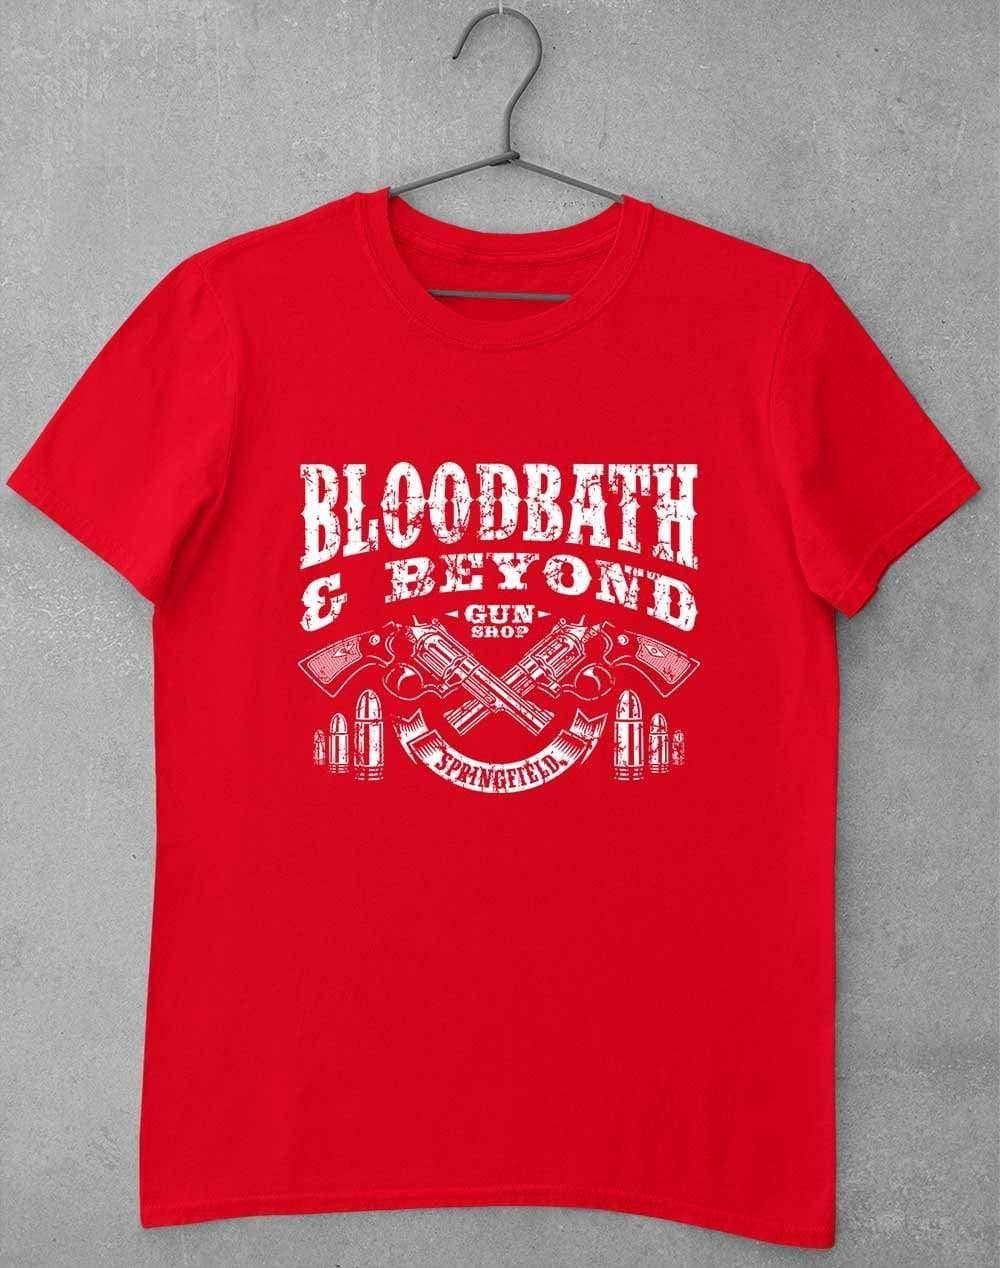 Bloodbath and Beyond T-Shirt S / Red  - Off World Tees